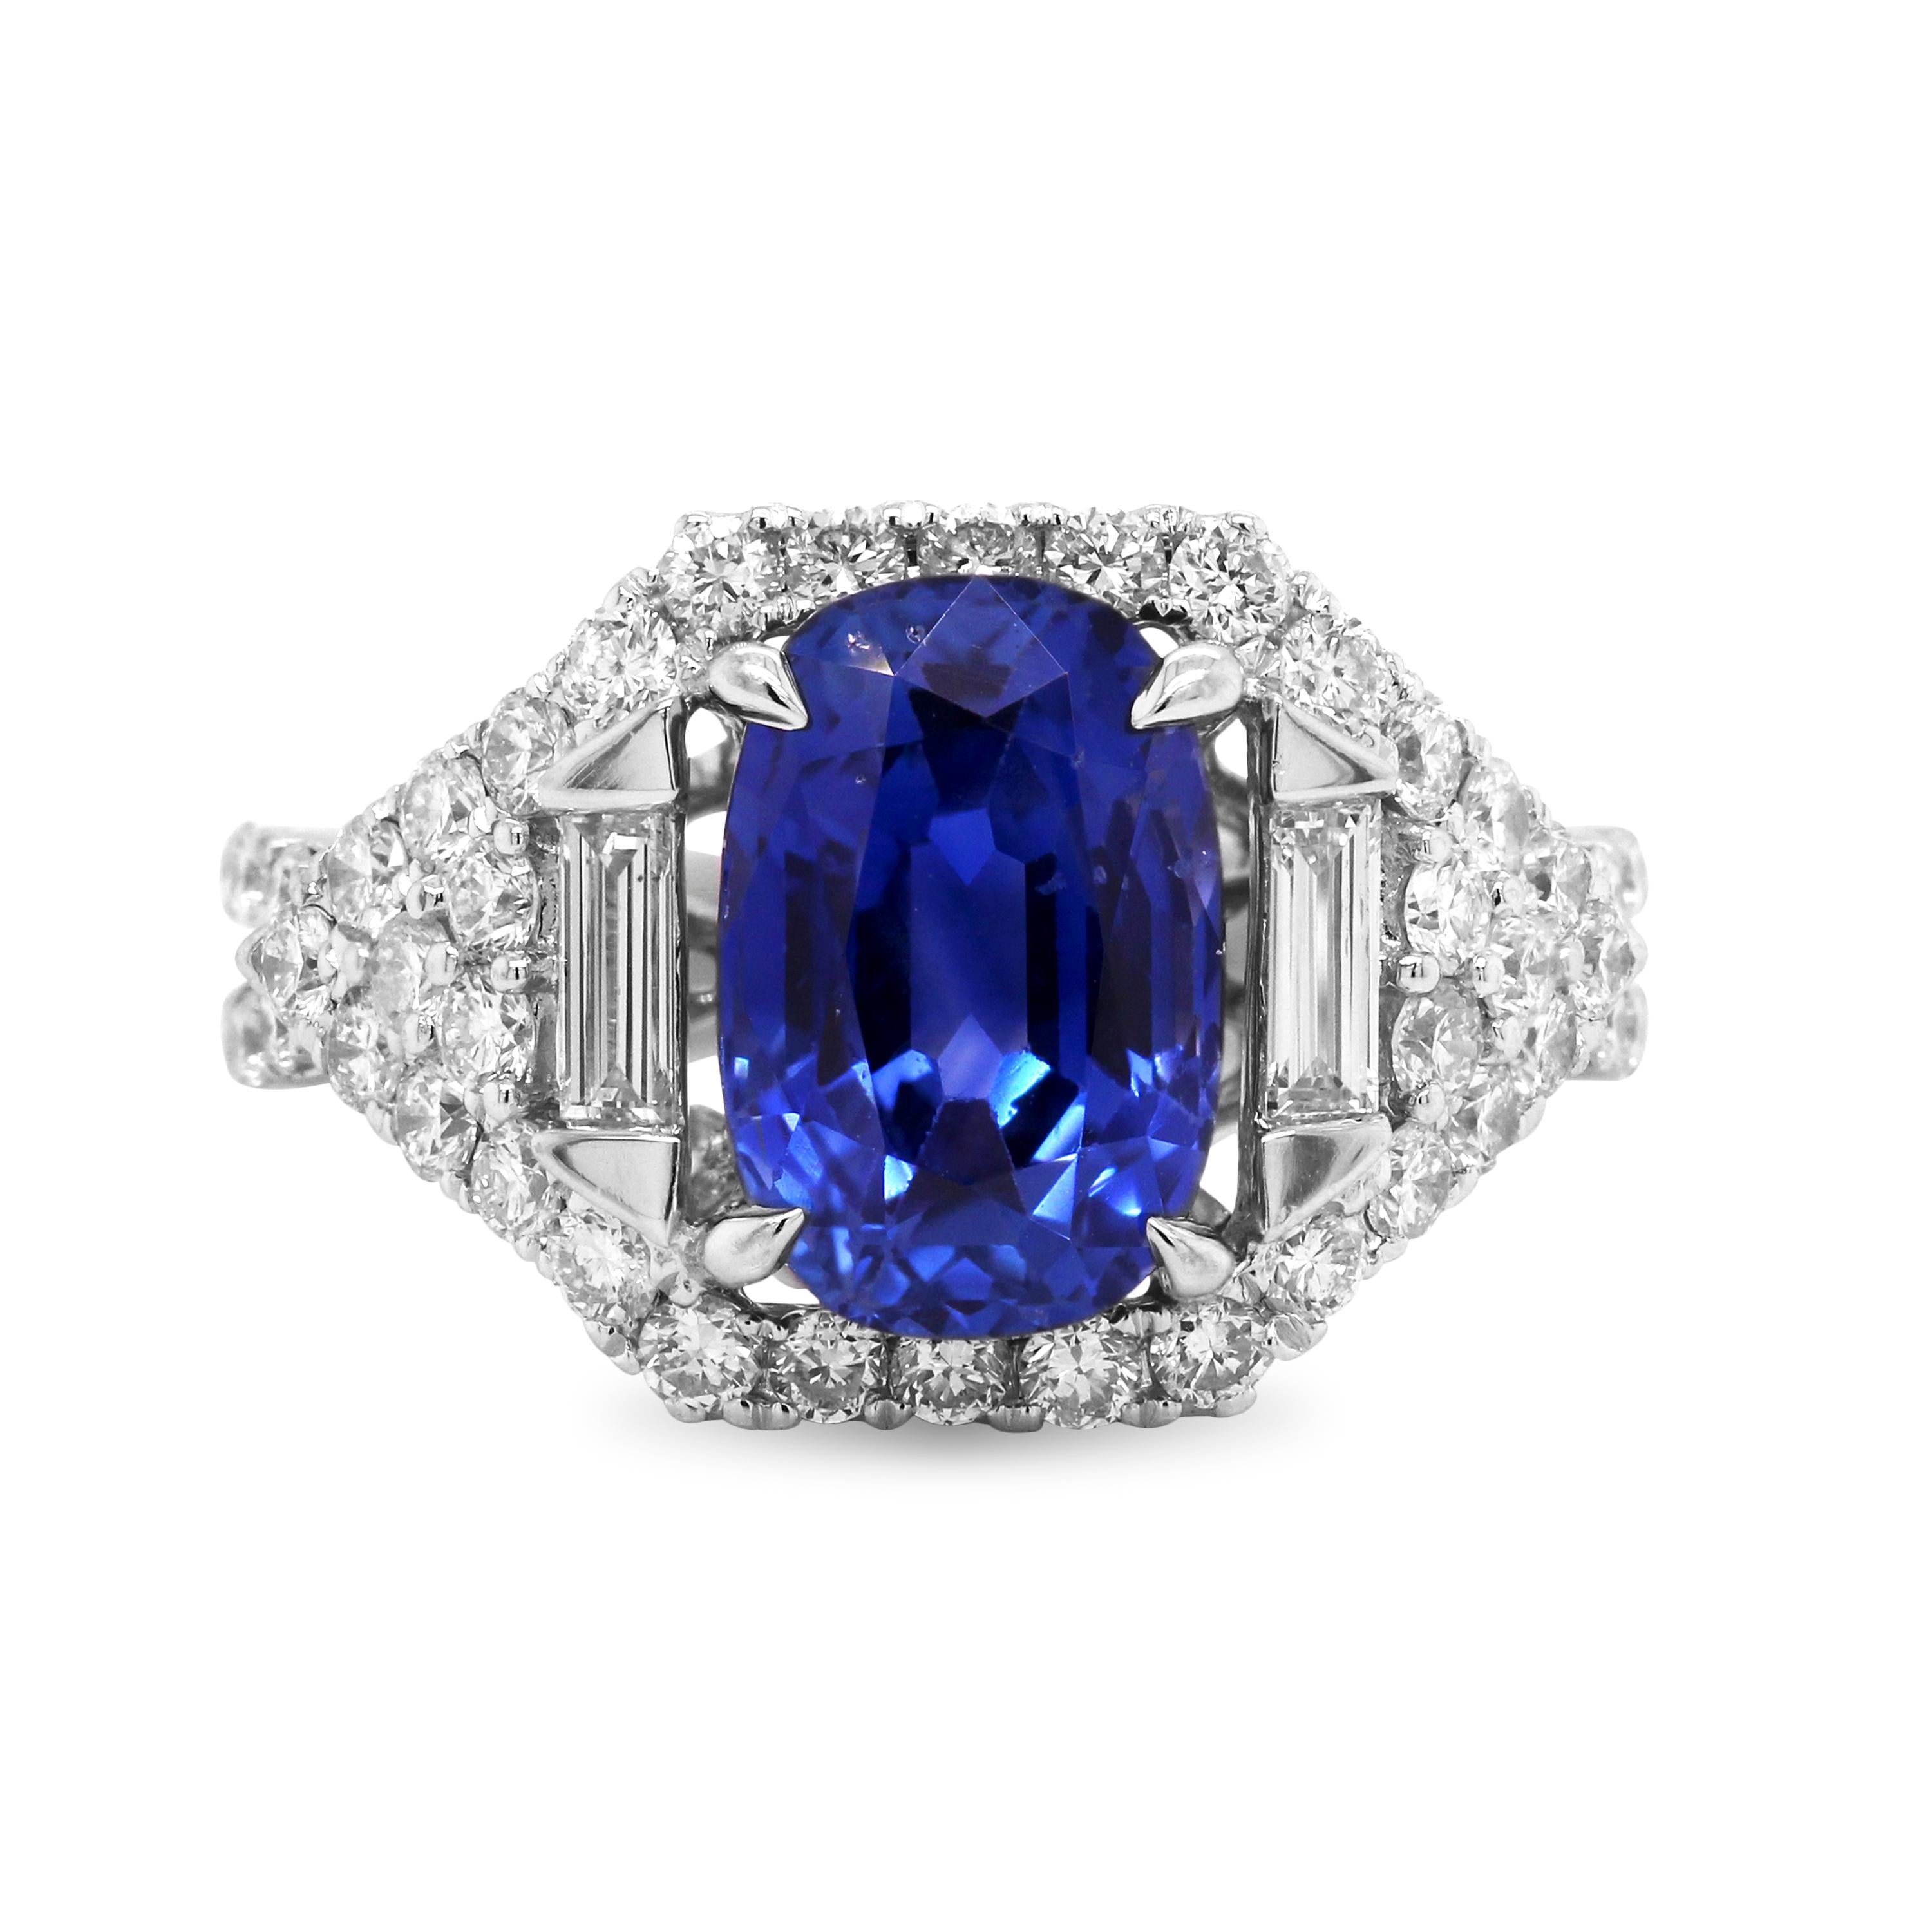 AGL Certified 4.09 Carat No Heat Ceylon Blue Sapphire 14K White Gold Diamond Ring

This exquisite work of art features a cushion-cut, AGL Certified, No Heat Blue Sapphire from Ceylon (Sri Lanka). The ring has round diamonds set all throughout with